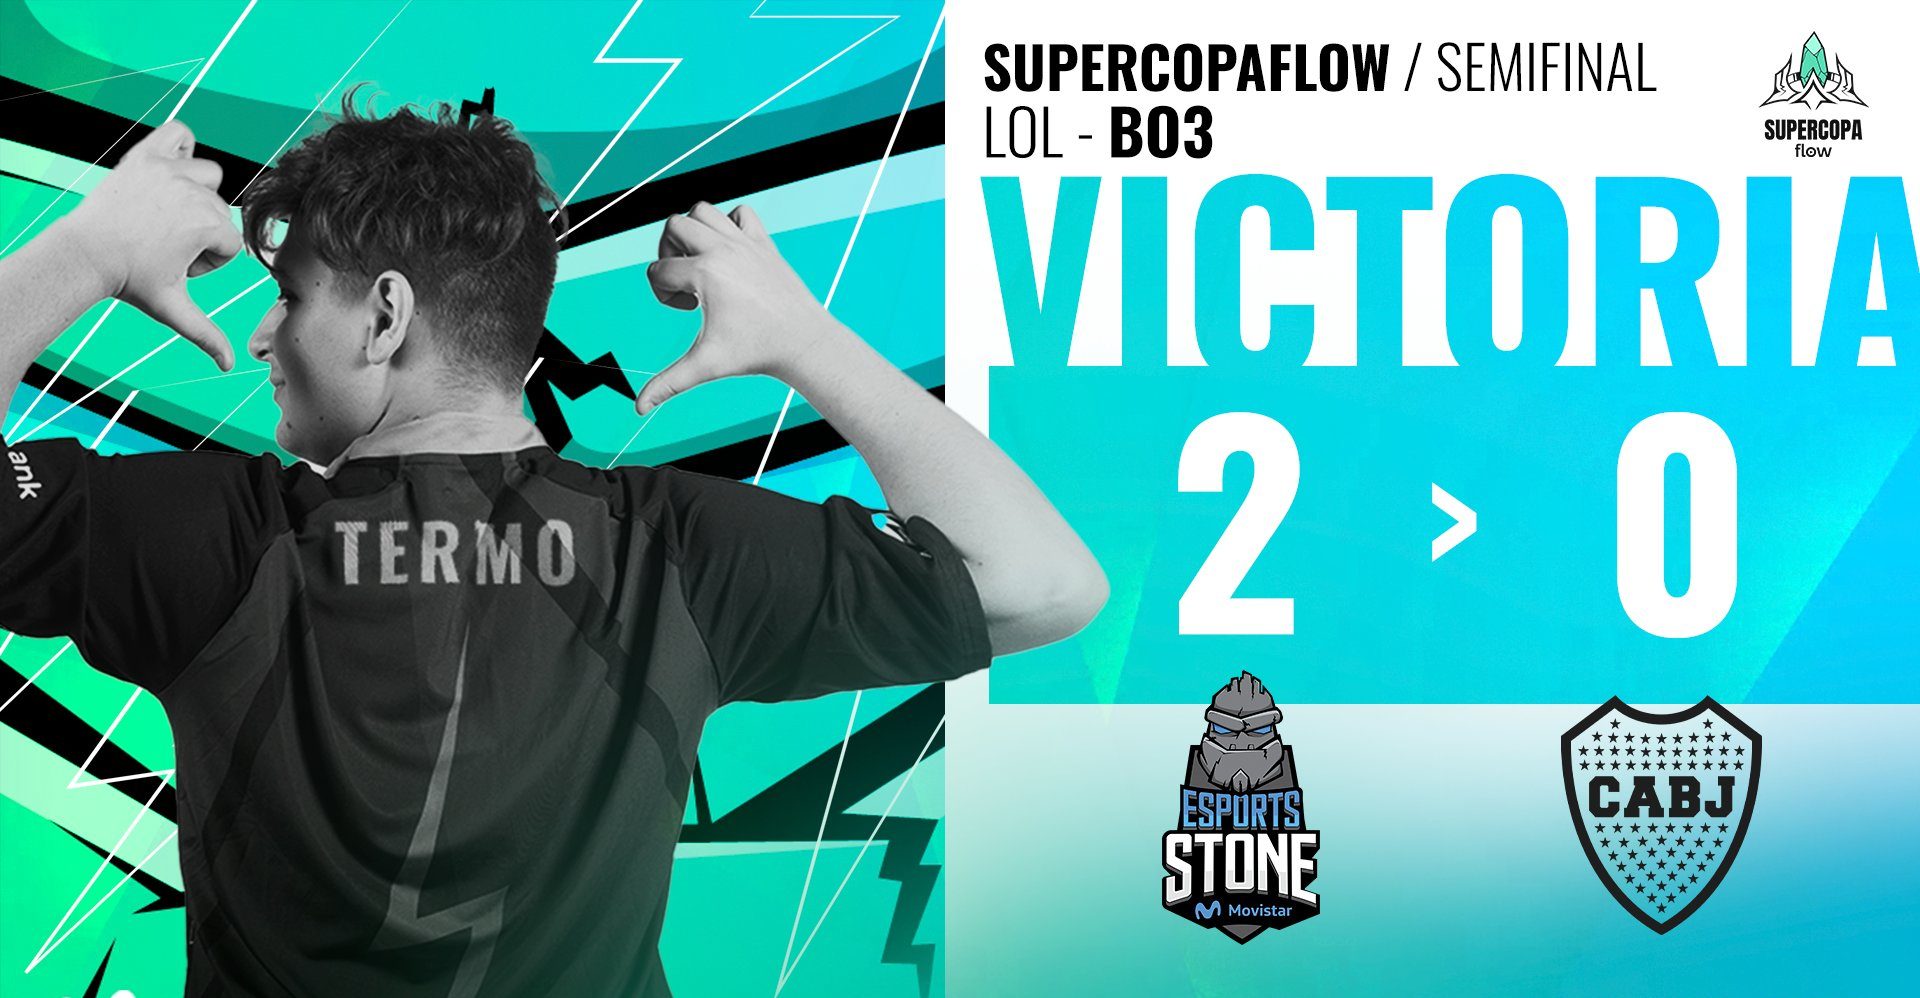 LOL LVP SuperCopa Flow: how and where to watch the final between Stone Movistar and Savage Esports